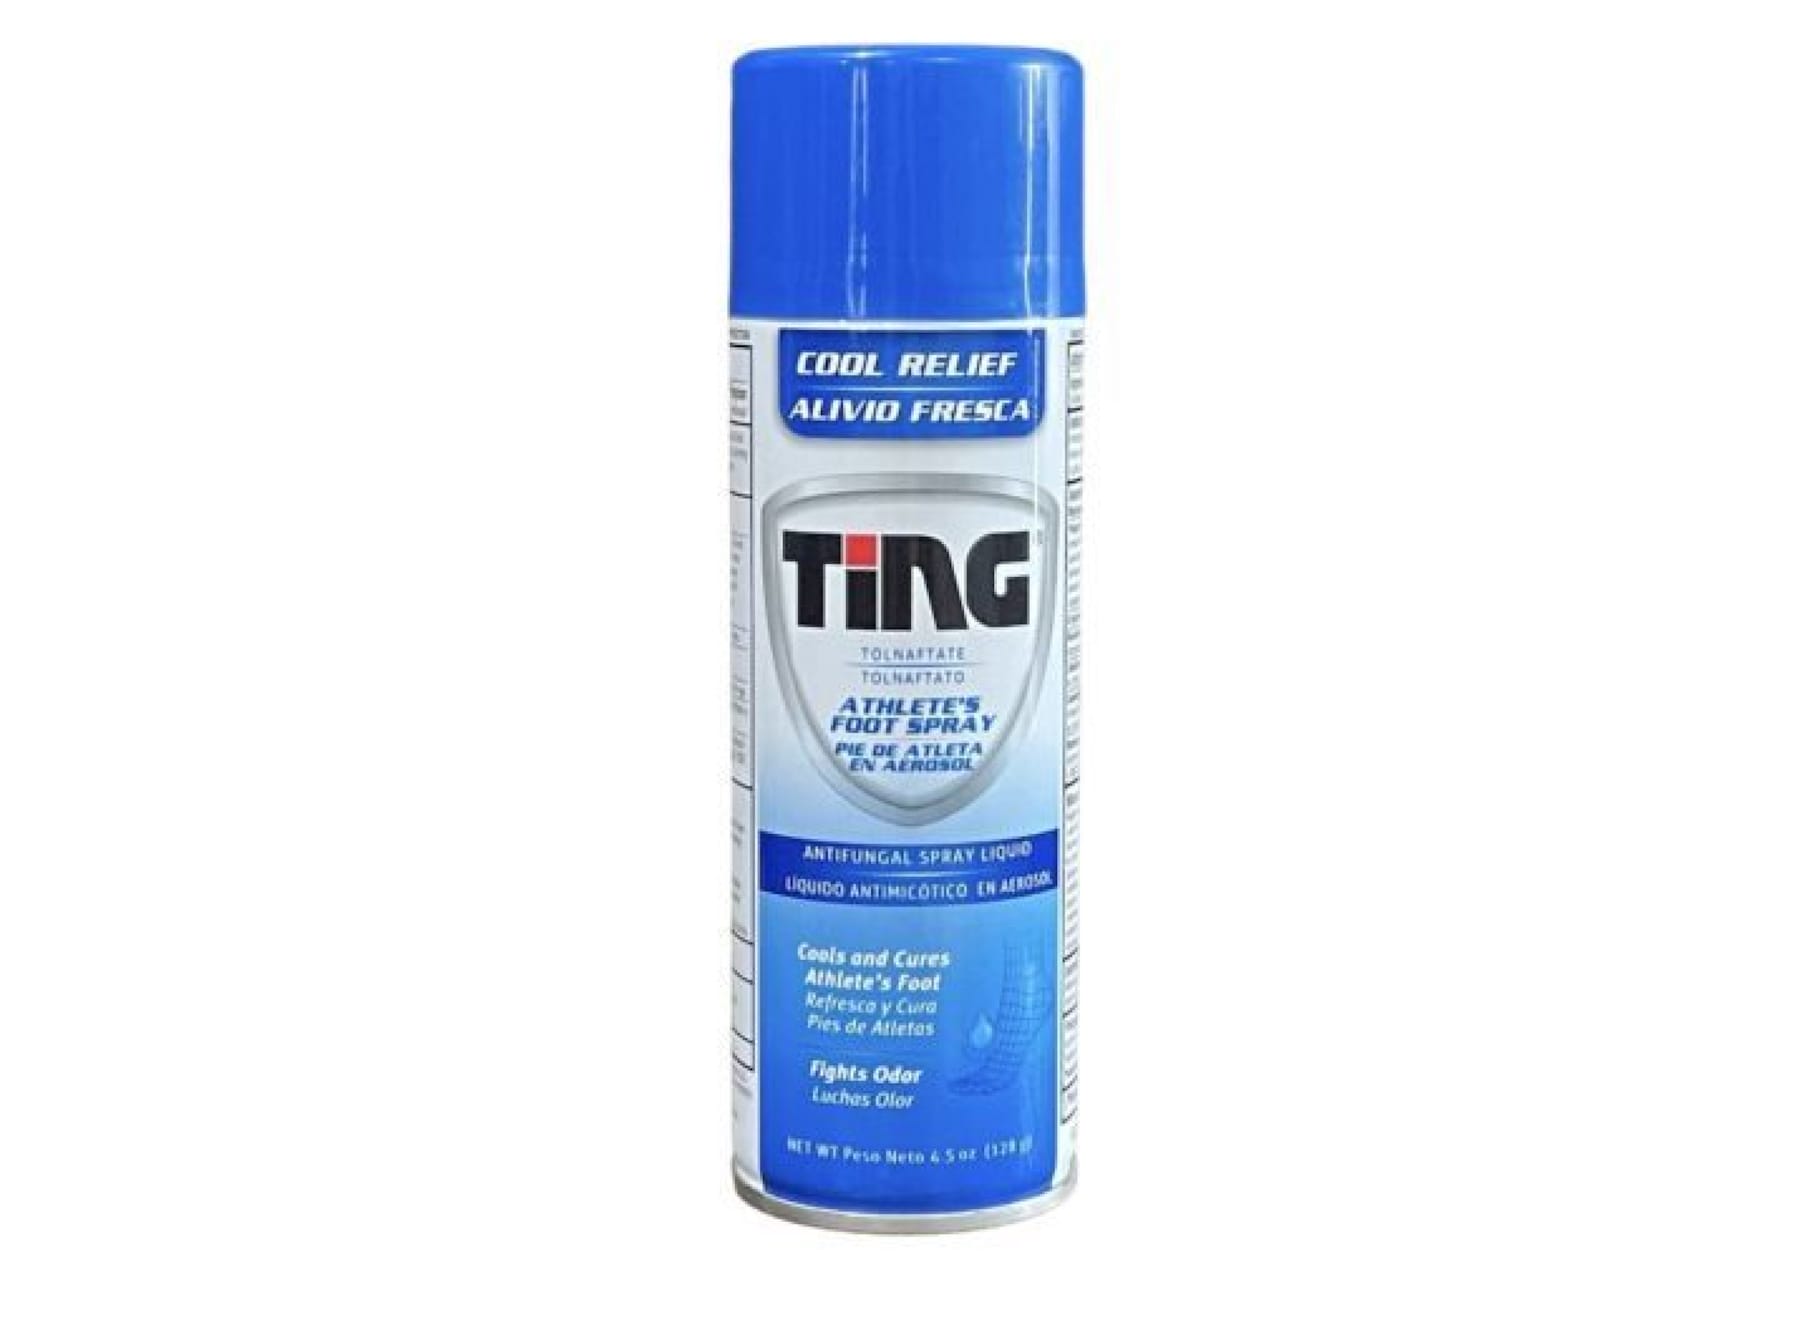 TING Athlete's Foot Spray Recalled for Toxic Benzene 